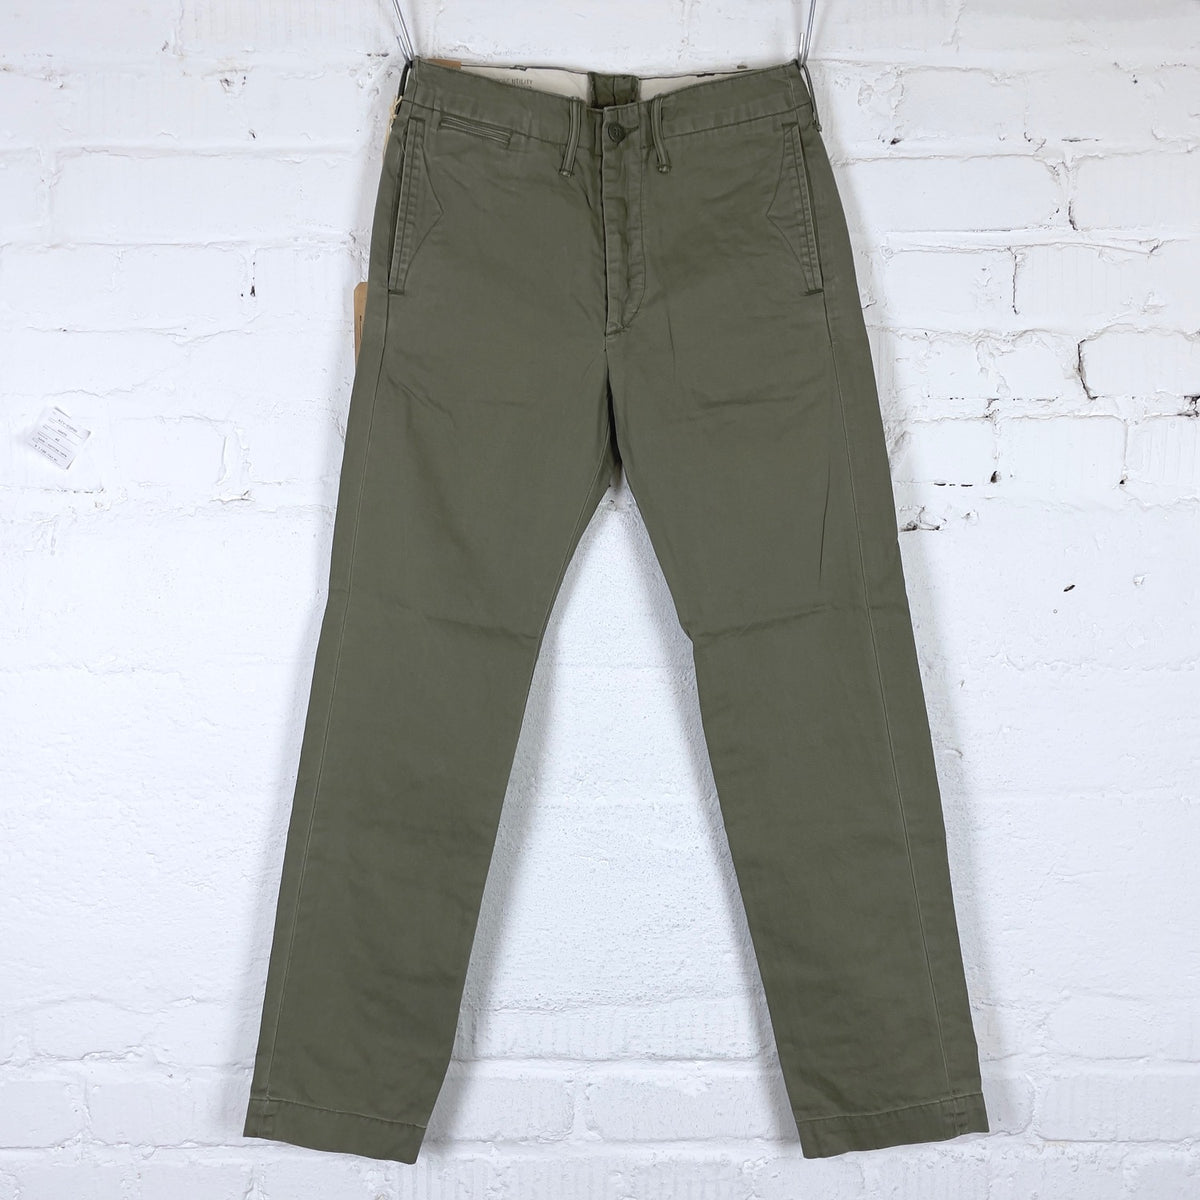 officer's chino olive | rrl | made in china